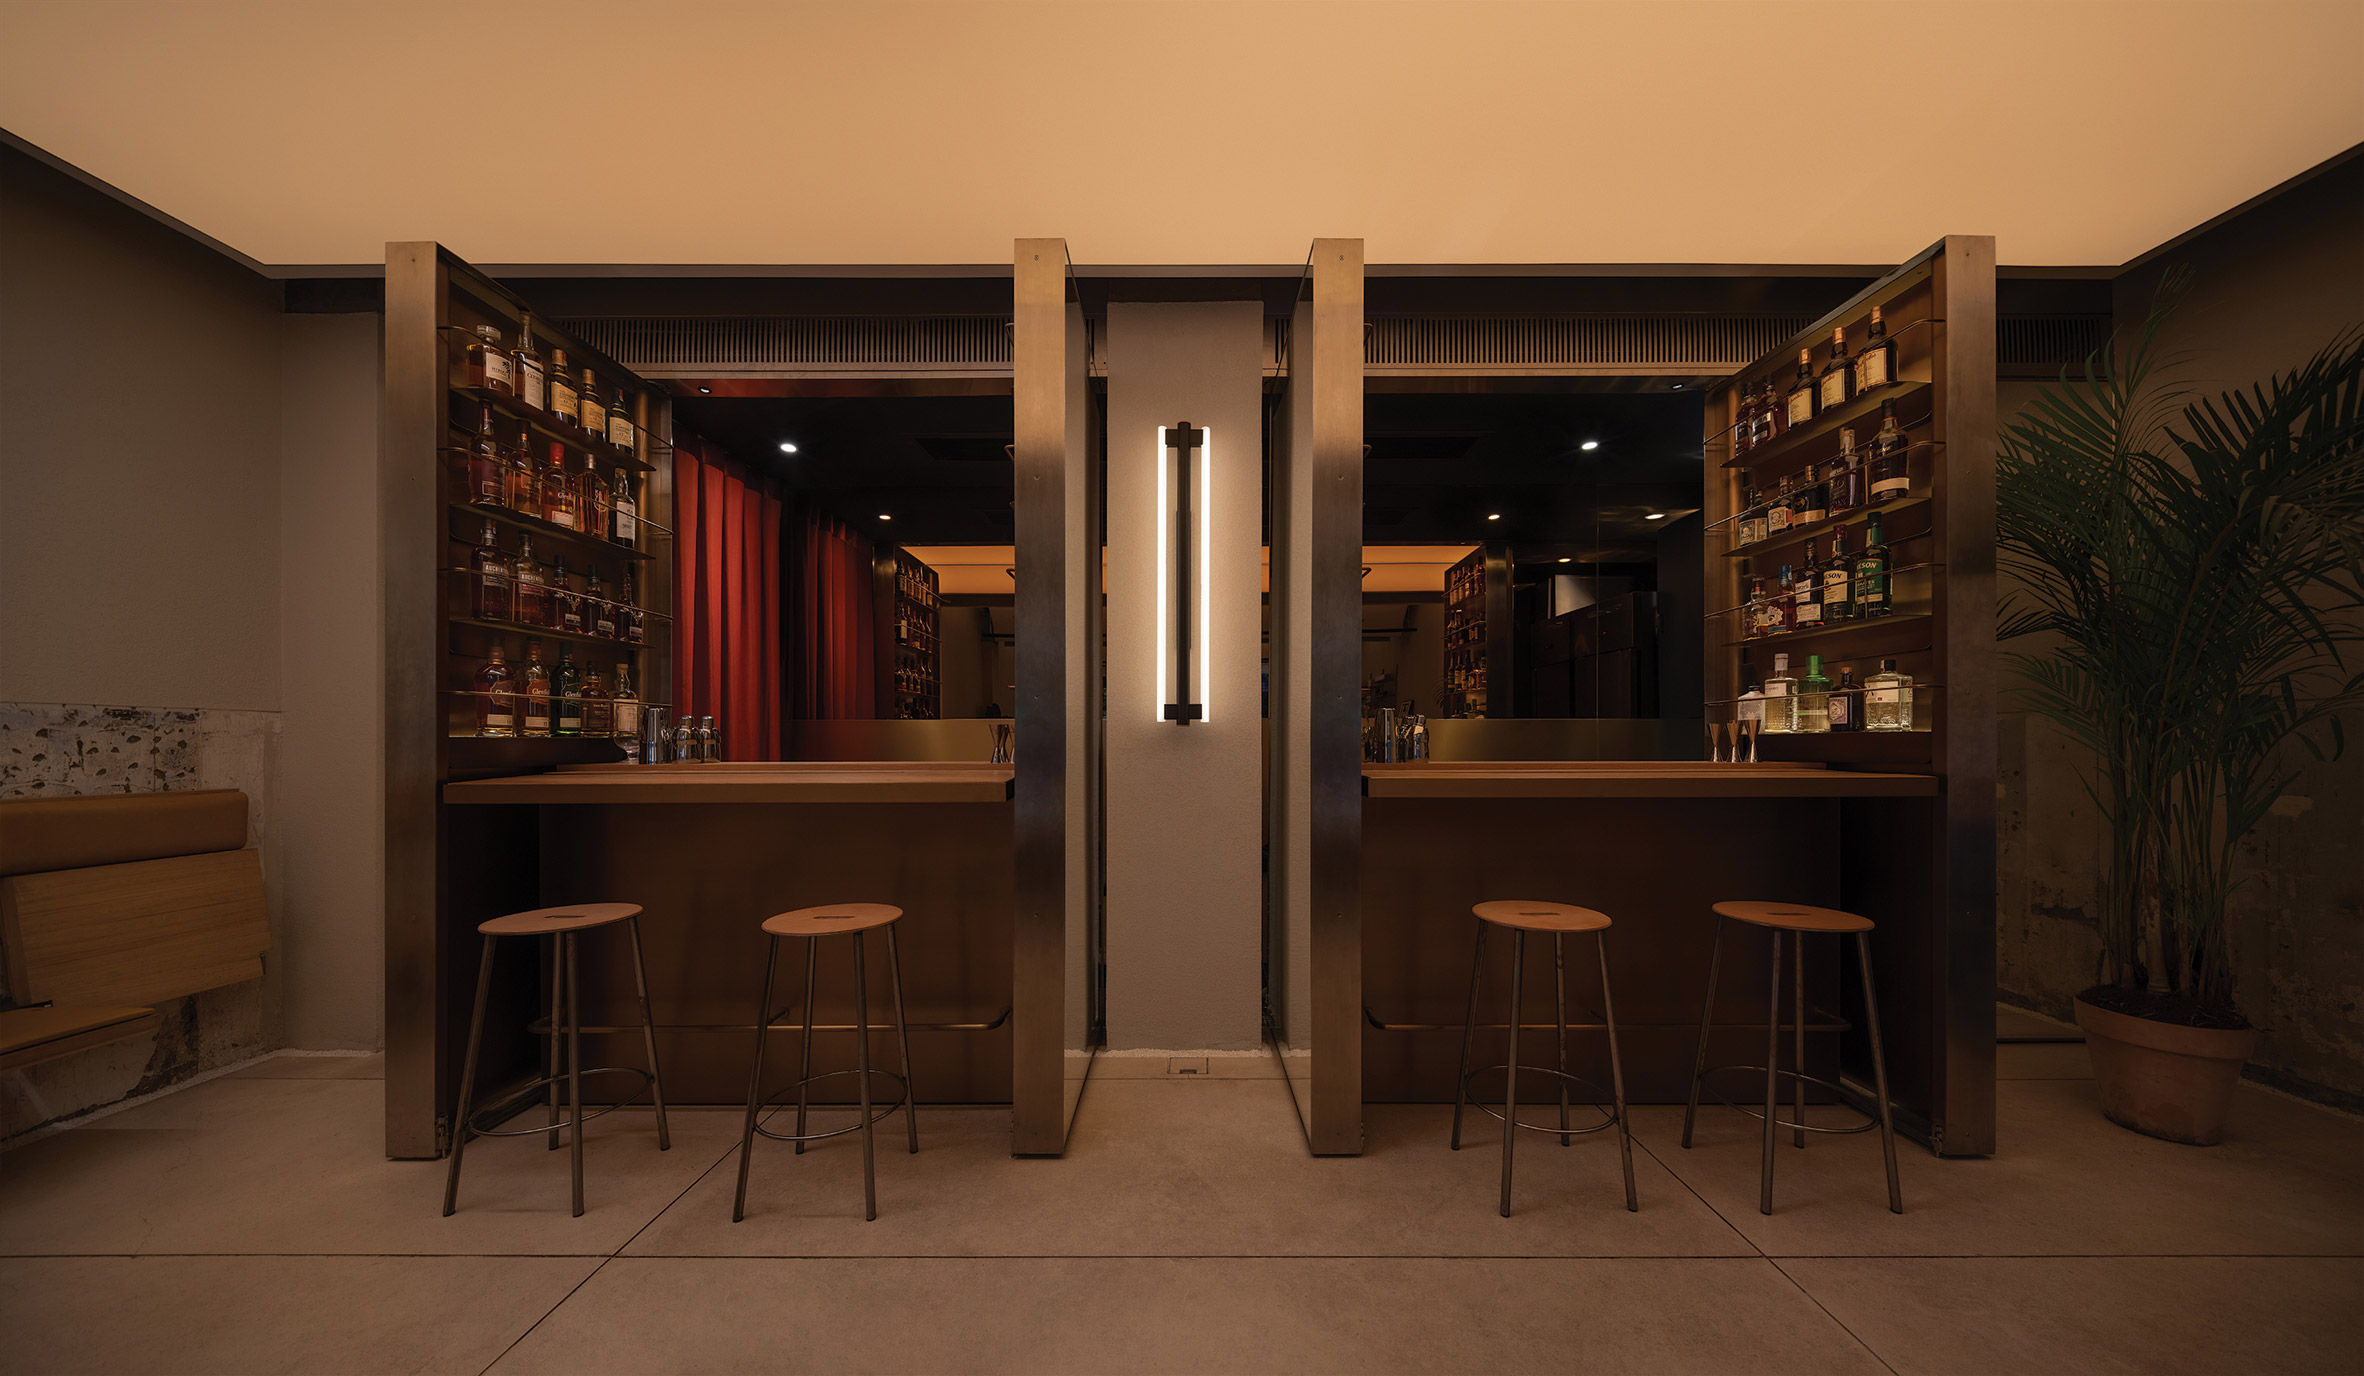 Shop O in Chengdu designed by Office AIO becomes a bar at night